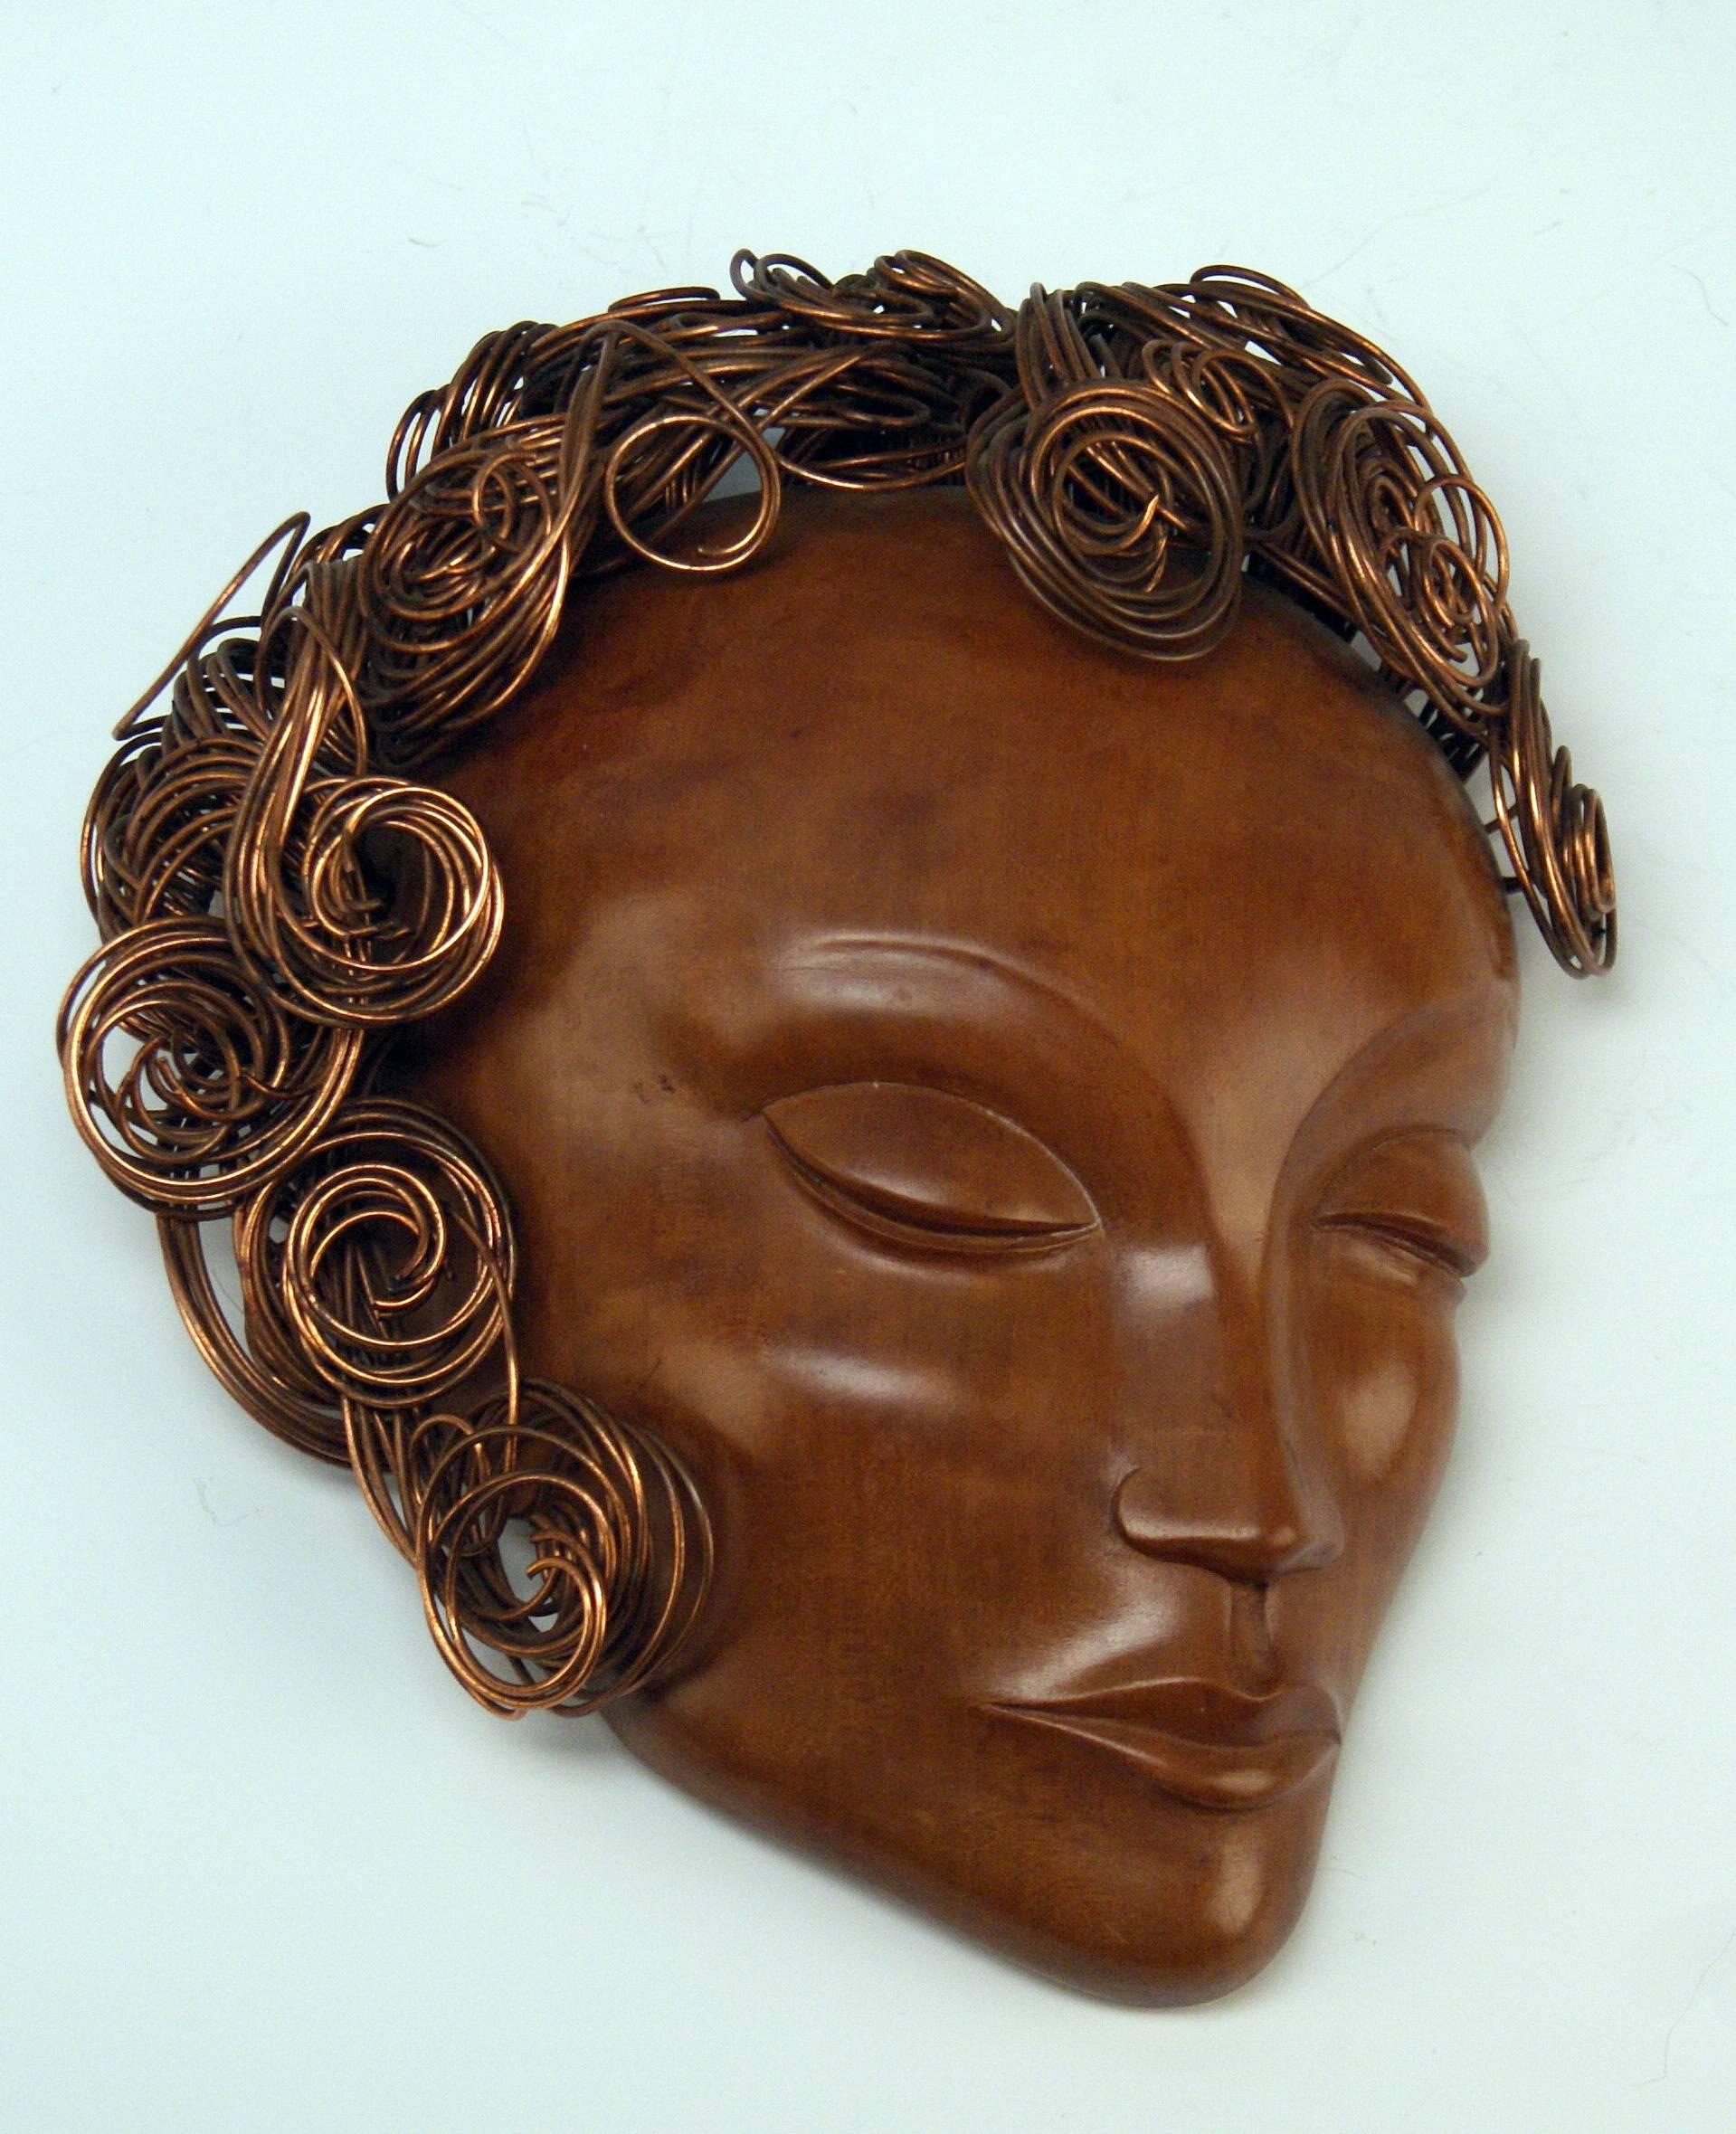 Carved Art Deco Wooden Head Lady Curled Copper Hair by Hagenauer Vienna Made 1935-1940